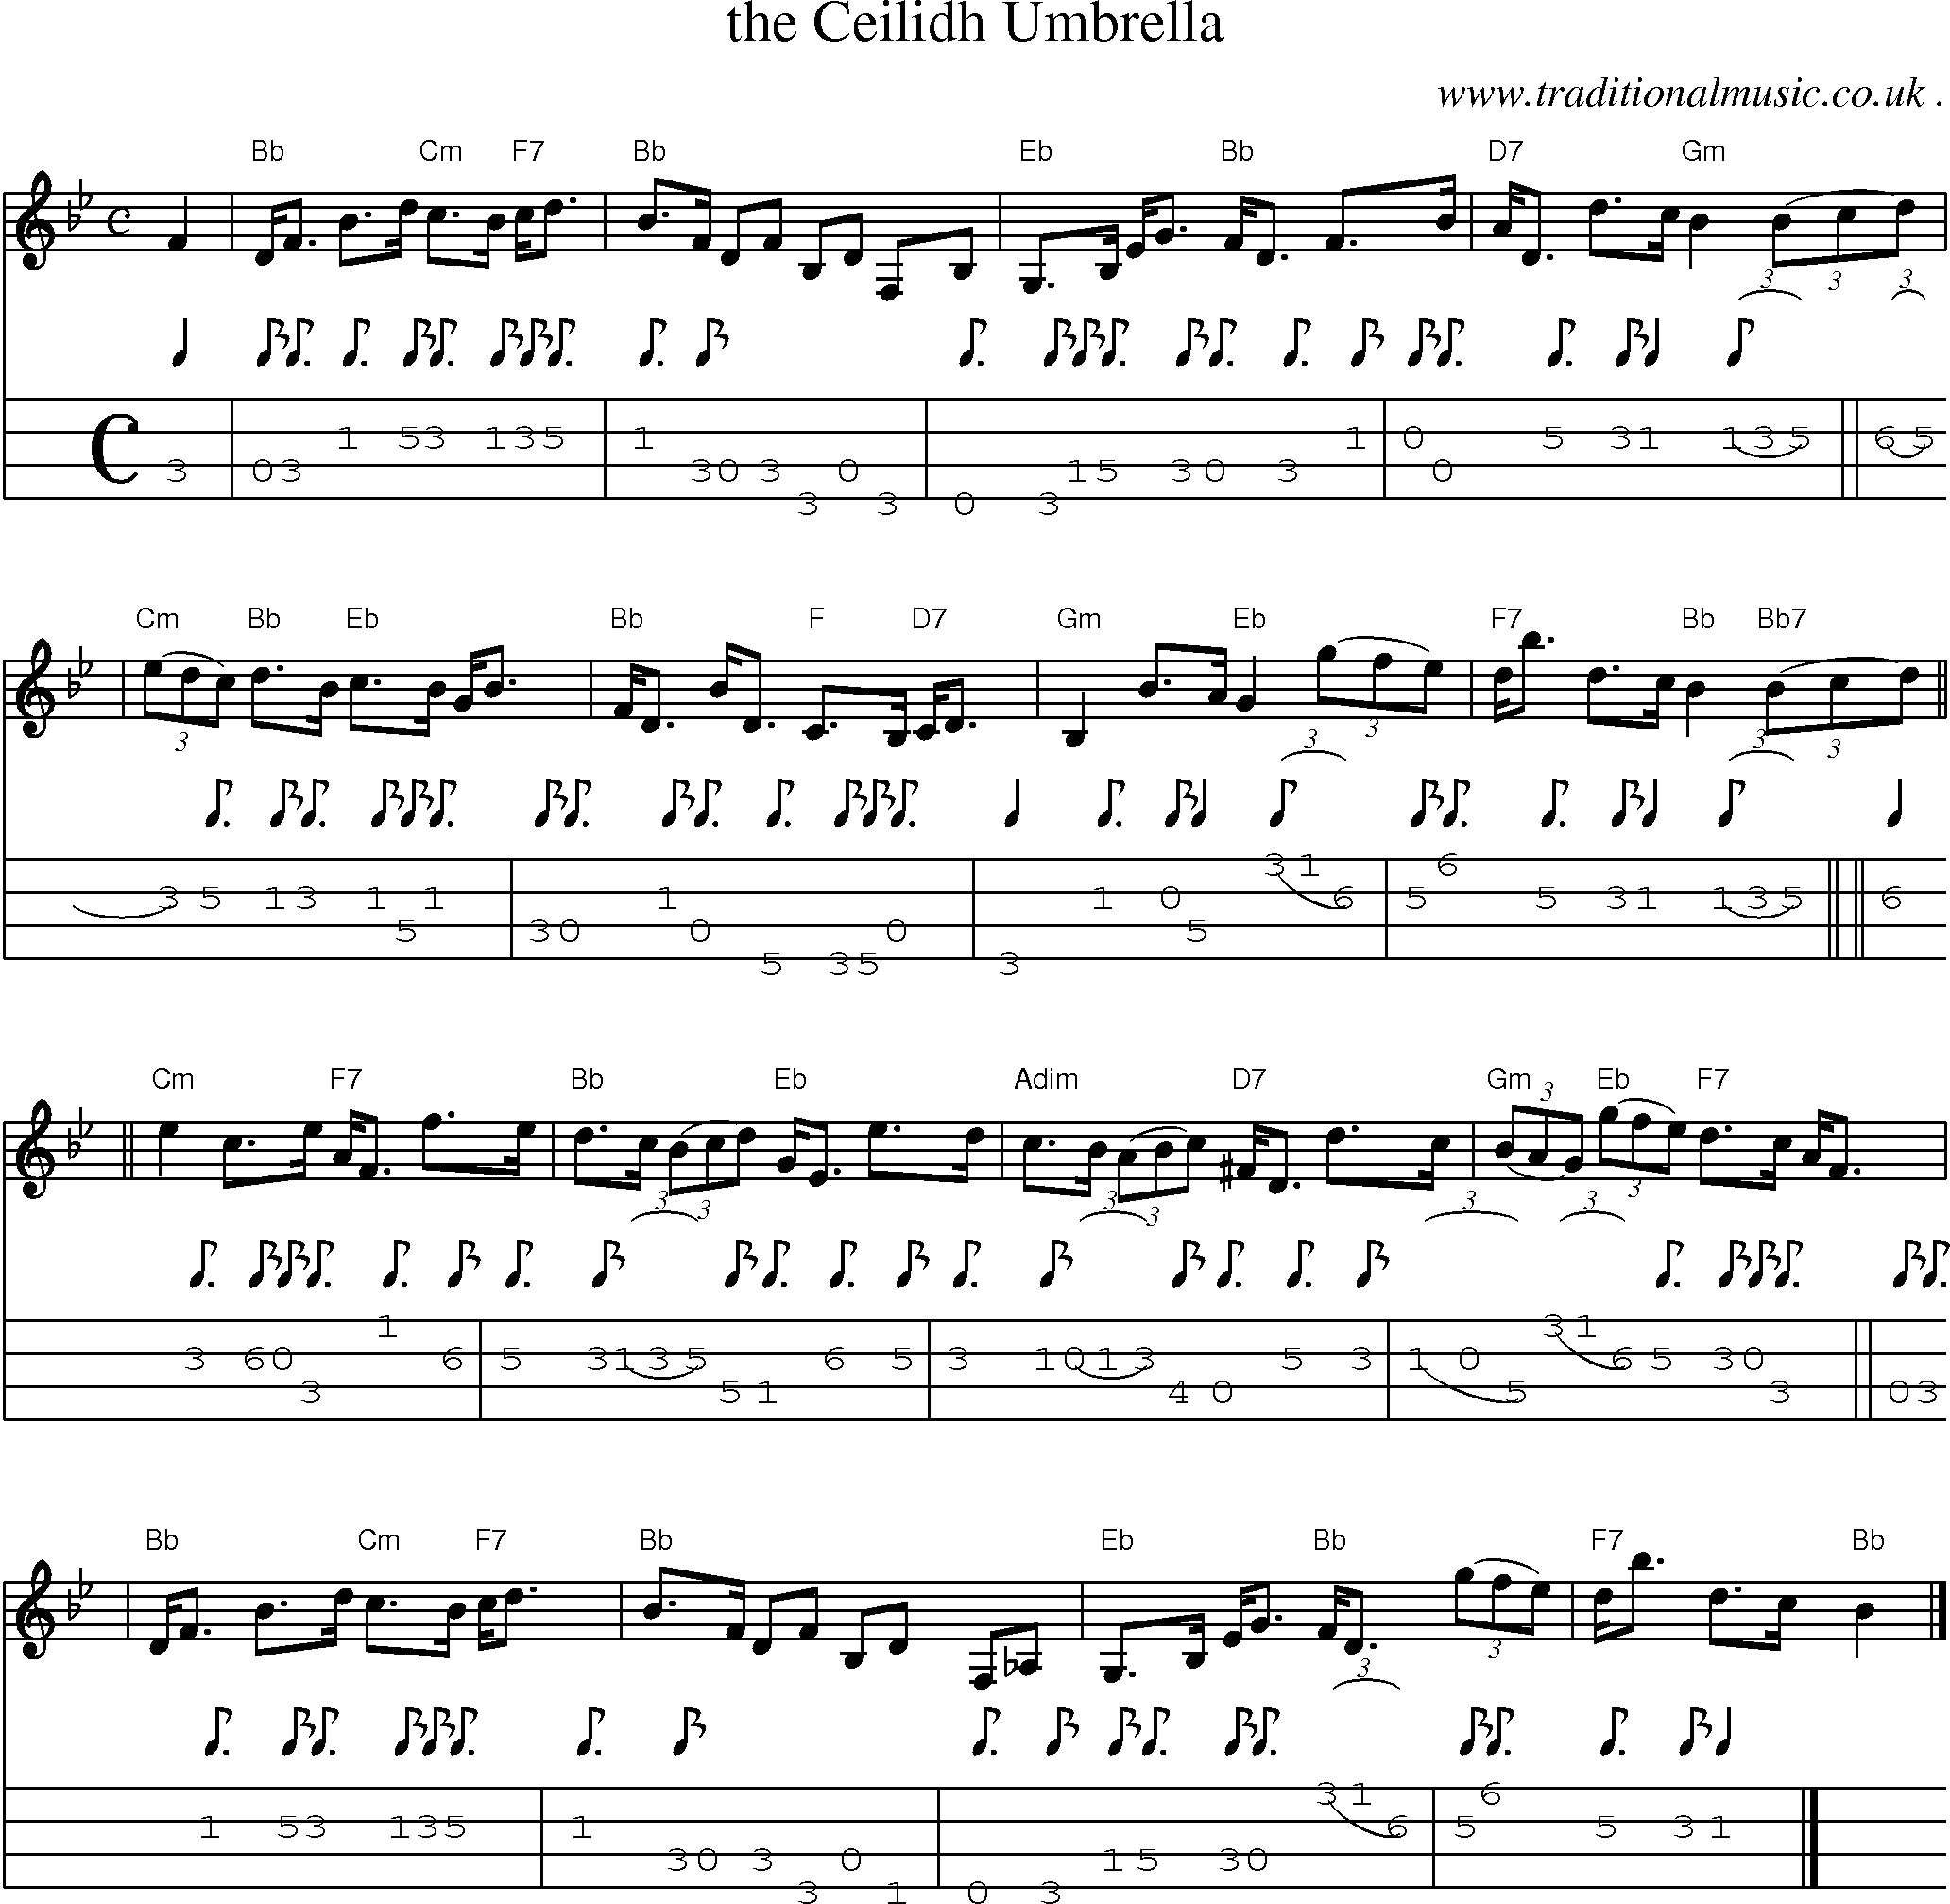 Sheet-music  score, Chords and Mandolin Tabs for The Ceilidh Umbrella